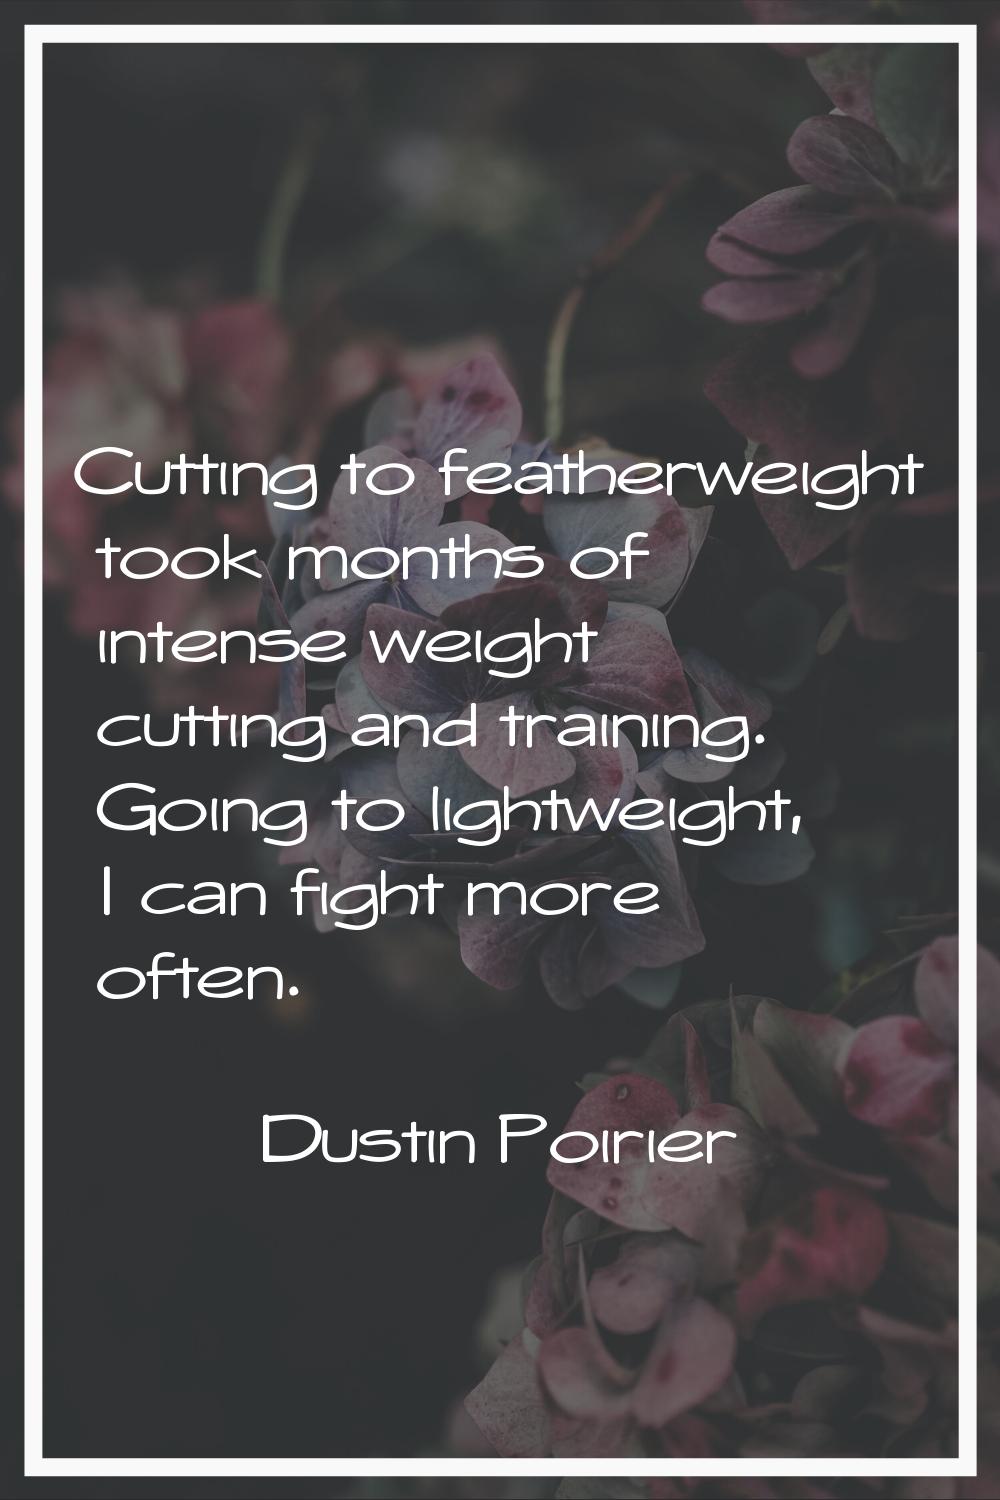 Cutting to featherweight took months of intense weight cutting and training. Going to lightweight, 